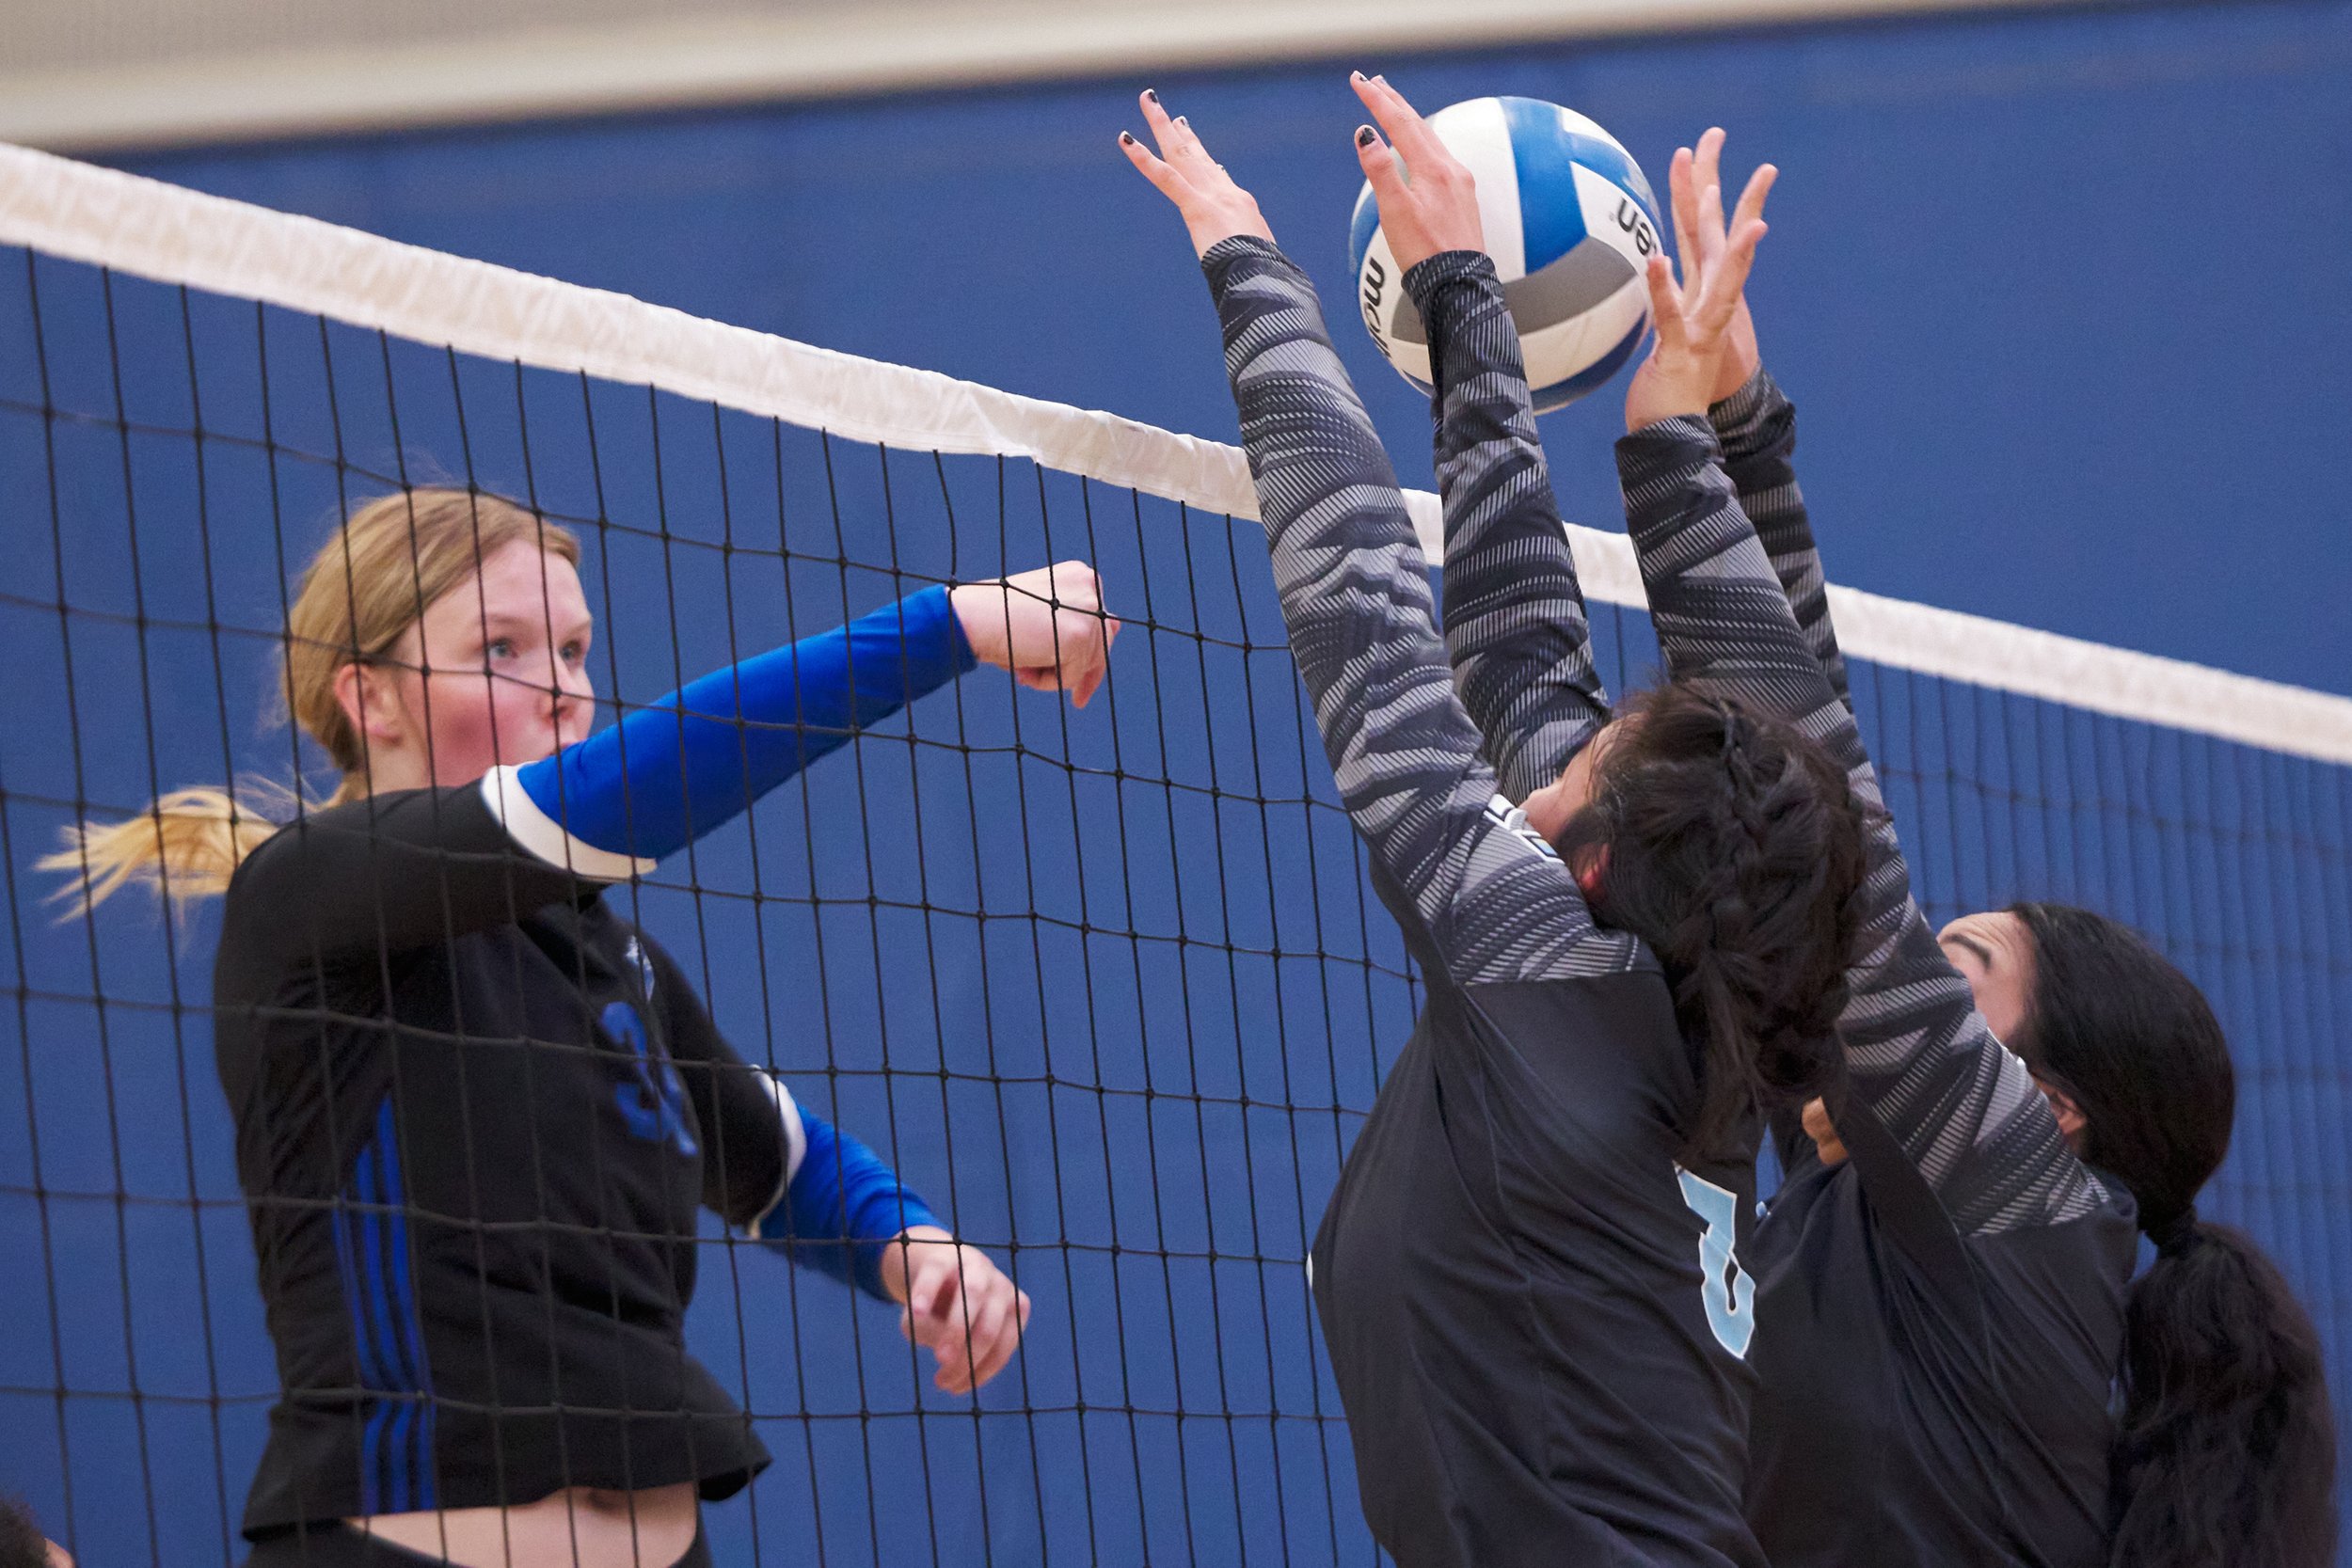  Cuyamaca College Coyotes' (right) Chelsea Hannibal and Kierrah Mamea block the ball sent by Santa Monica College Corsairs' Mylah Niksa (left) during the women's volleyball match on Wednesday, Sept. 6, 2023, at the SMC Gym in Santa Monica, Calif. The